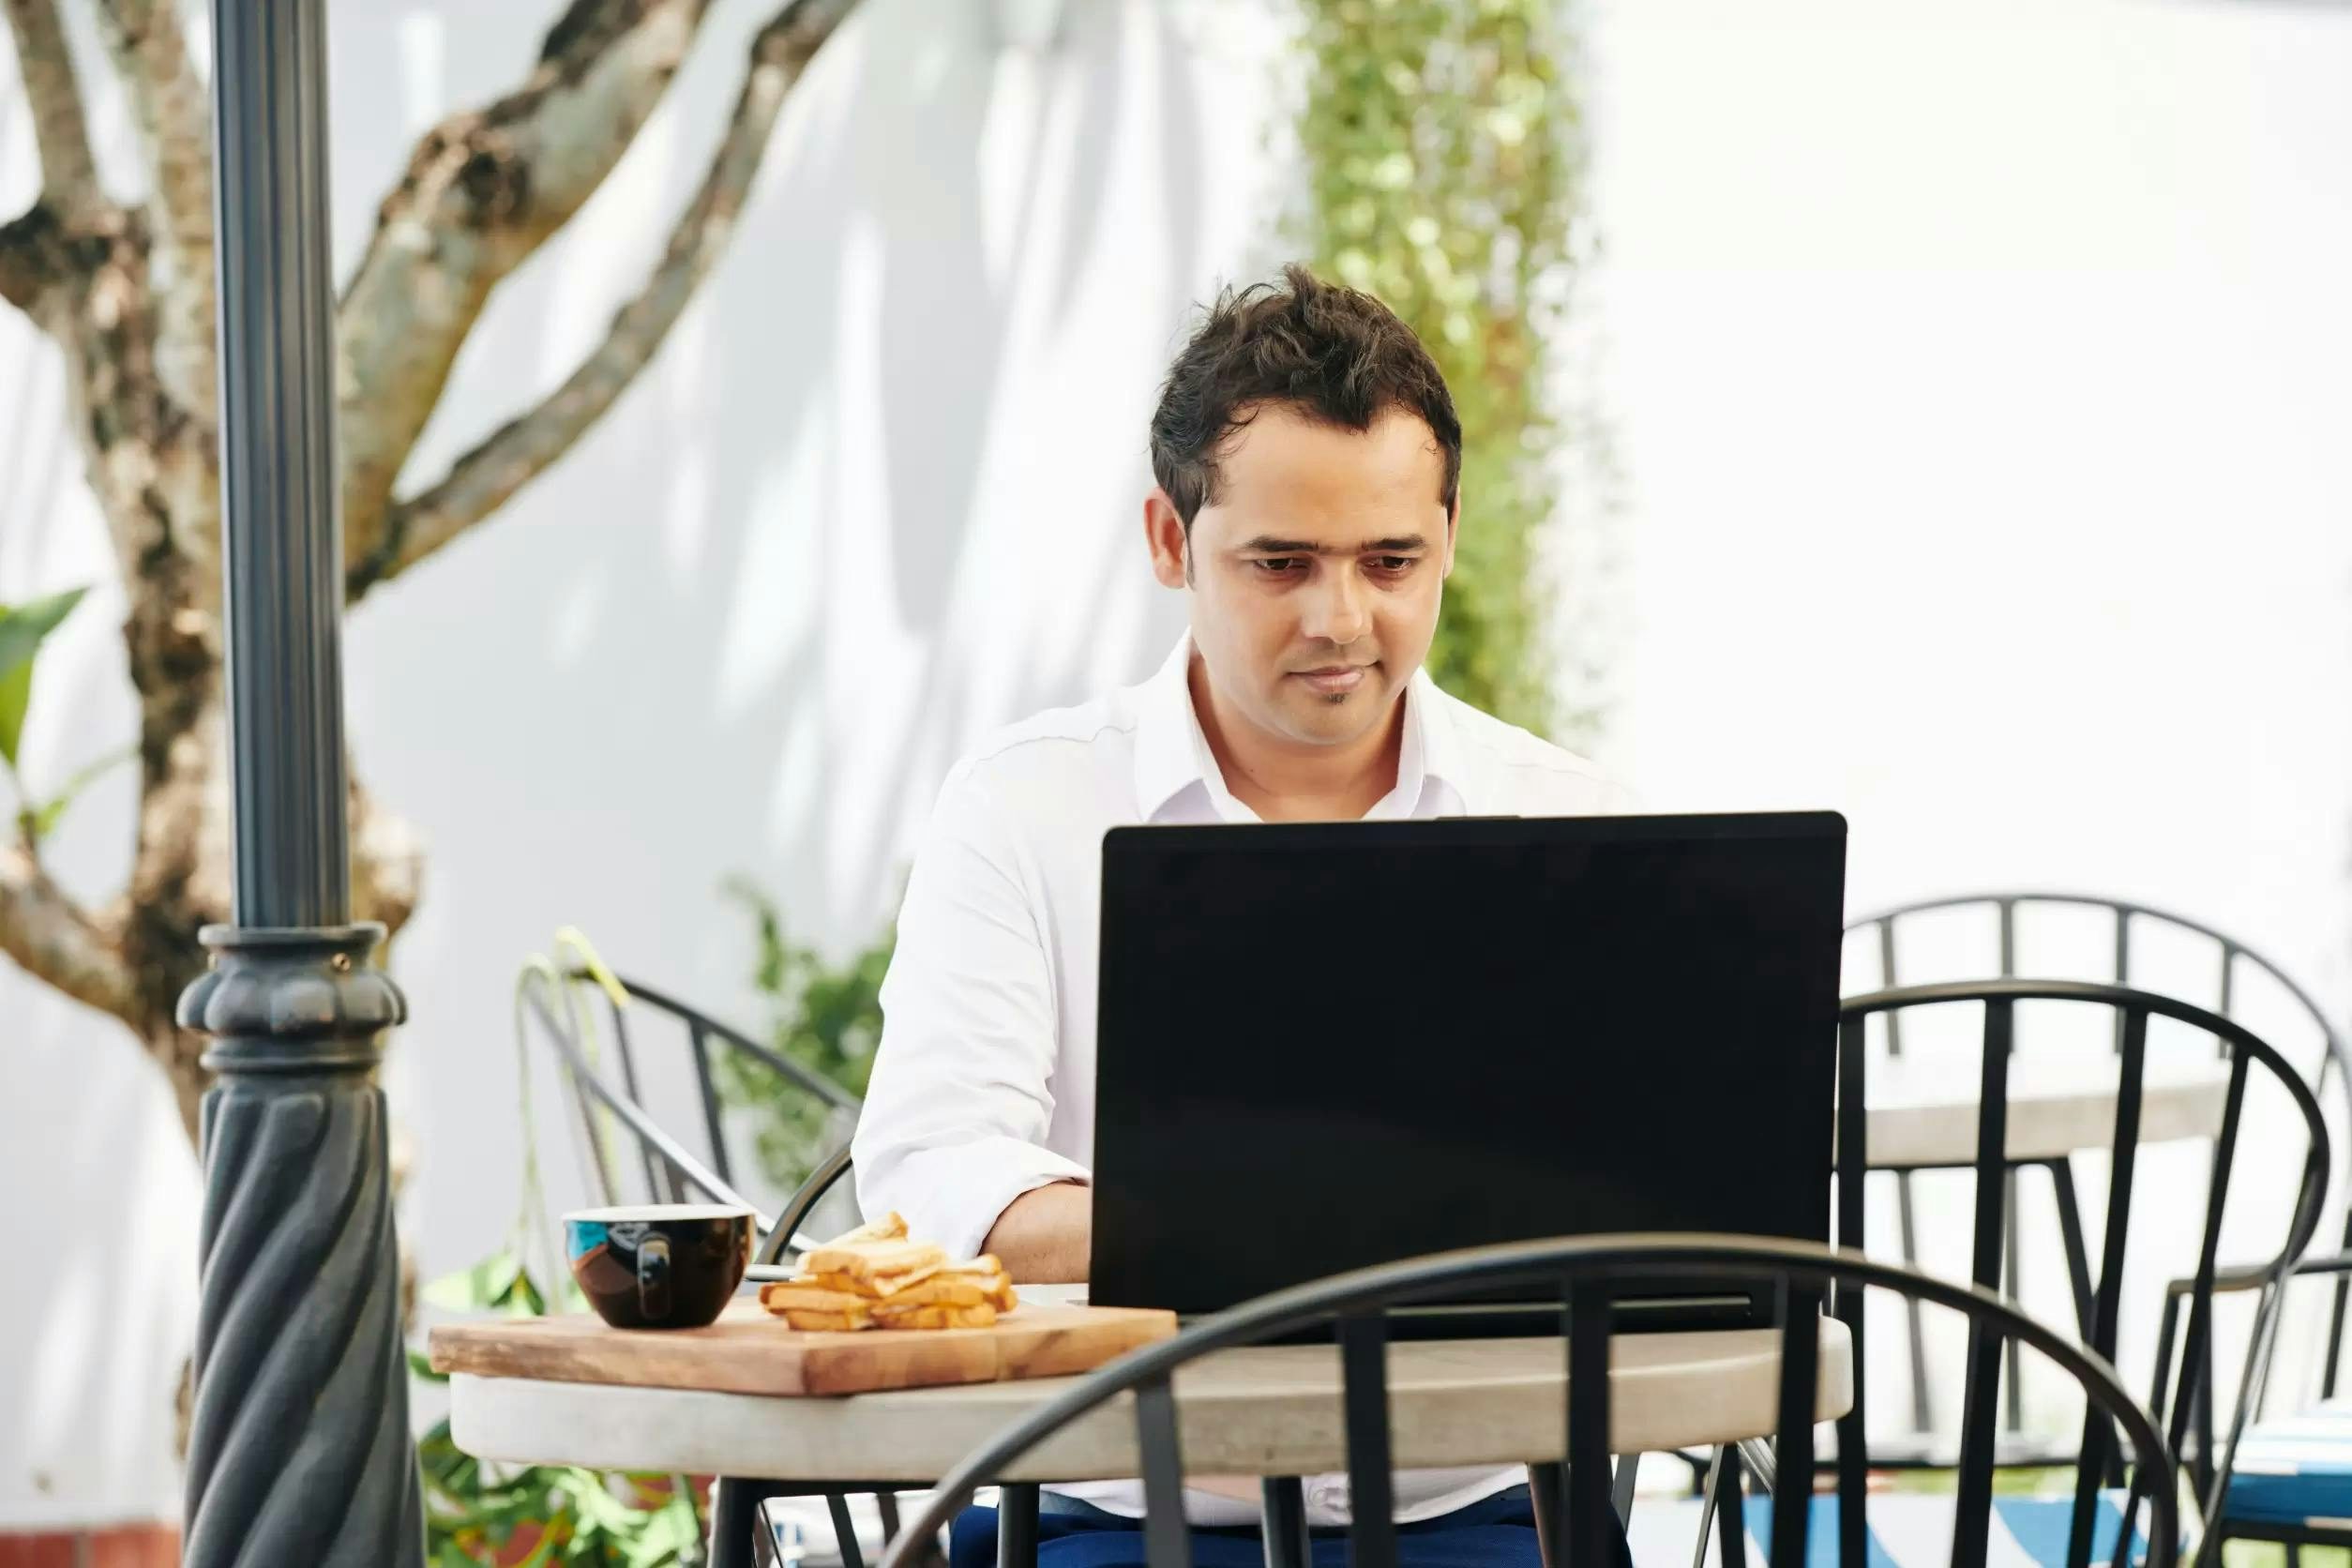 Man working outdoors in a cafe with a laptop and a plate of churros with chocolate